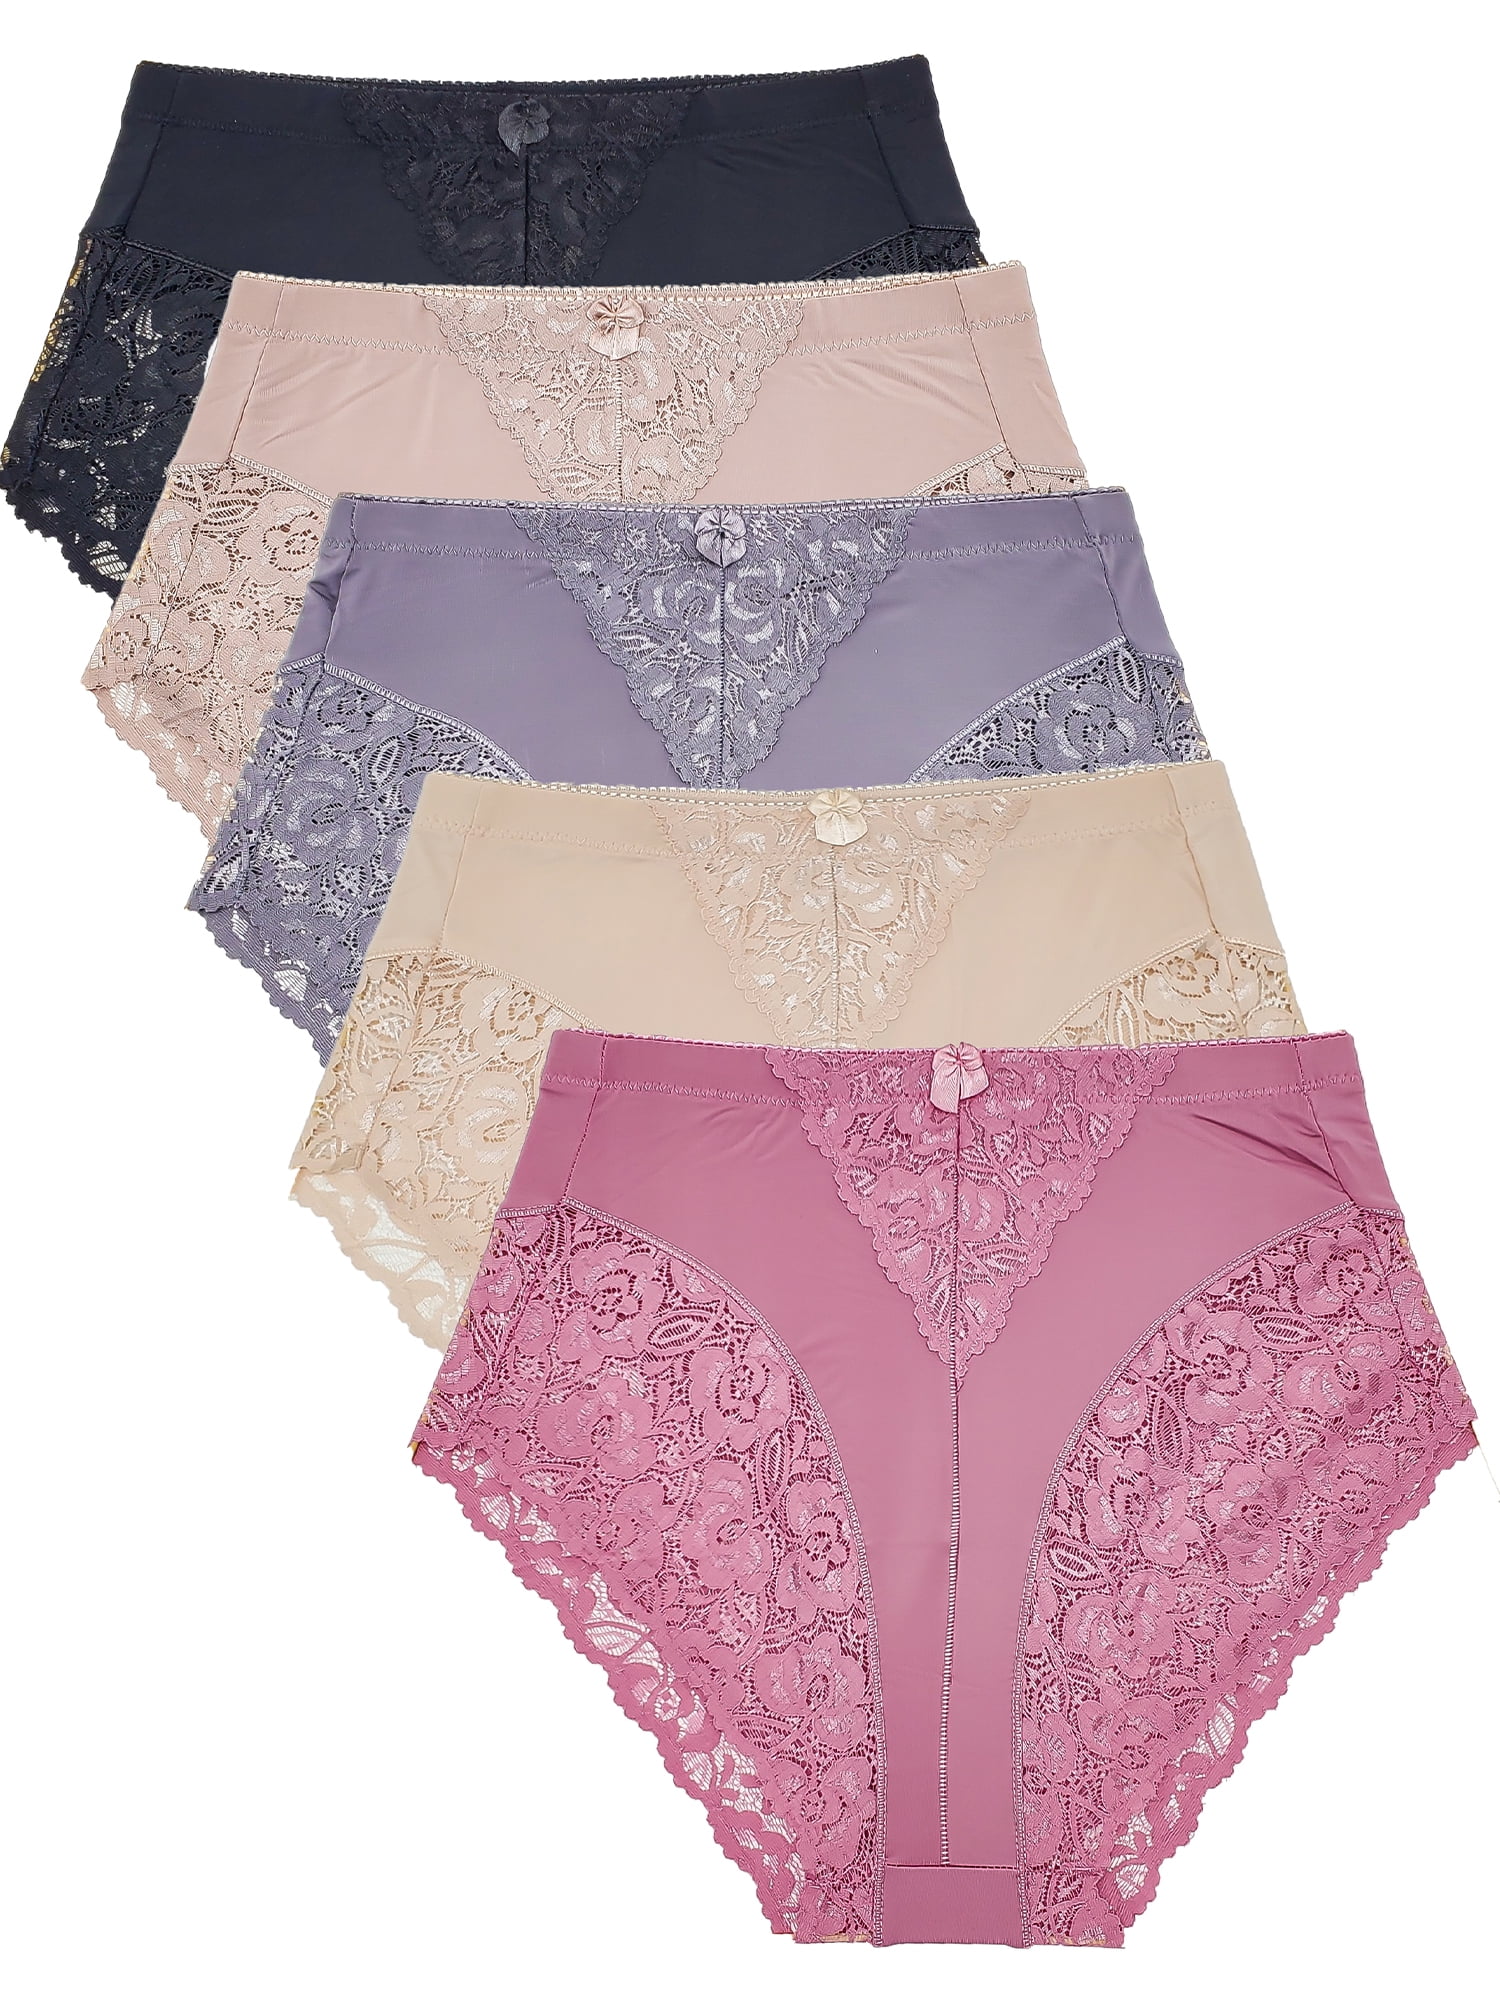 Barbra Women's Panties Light Control Lace Briefs Small to Plus